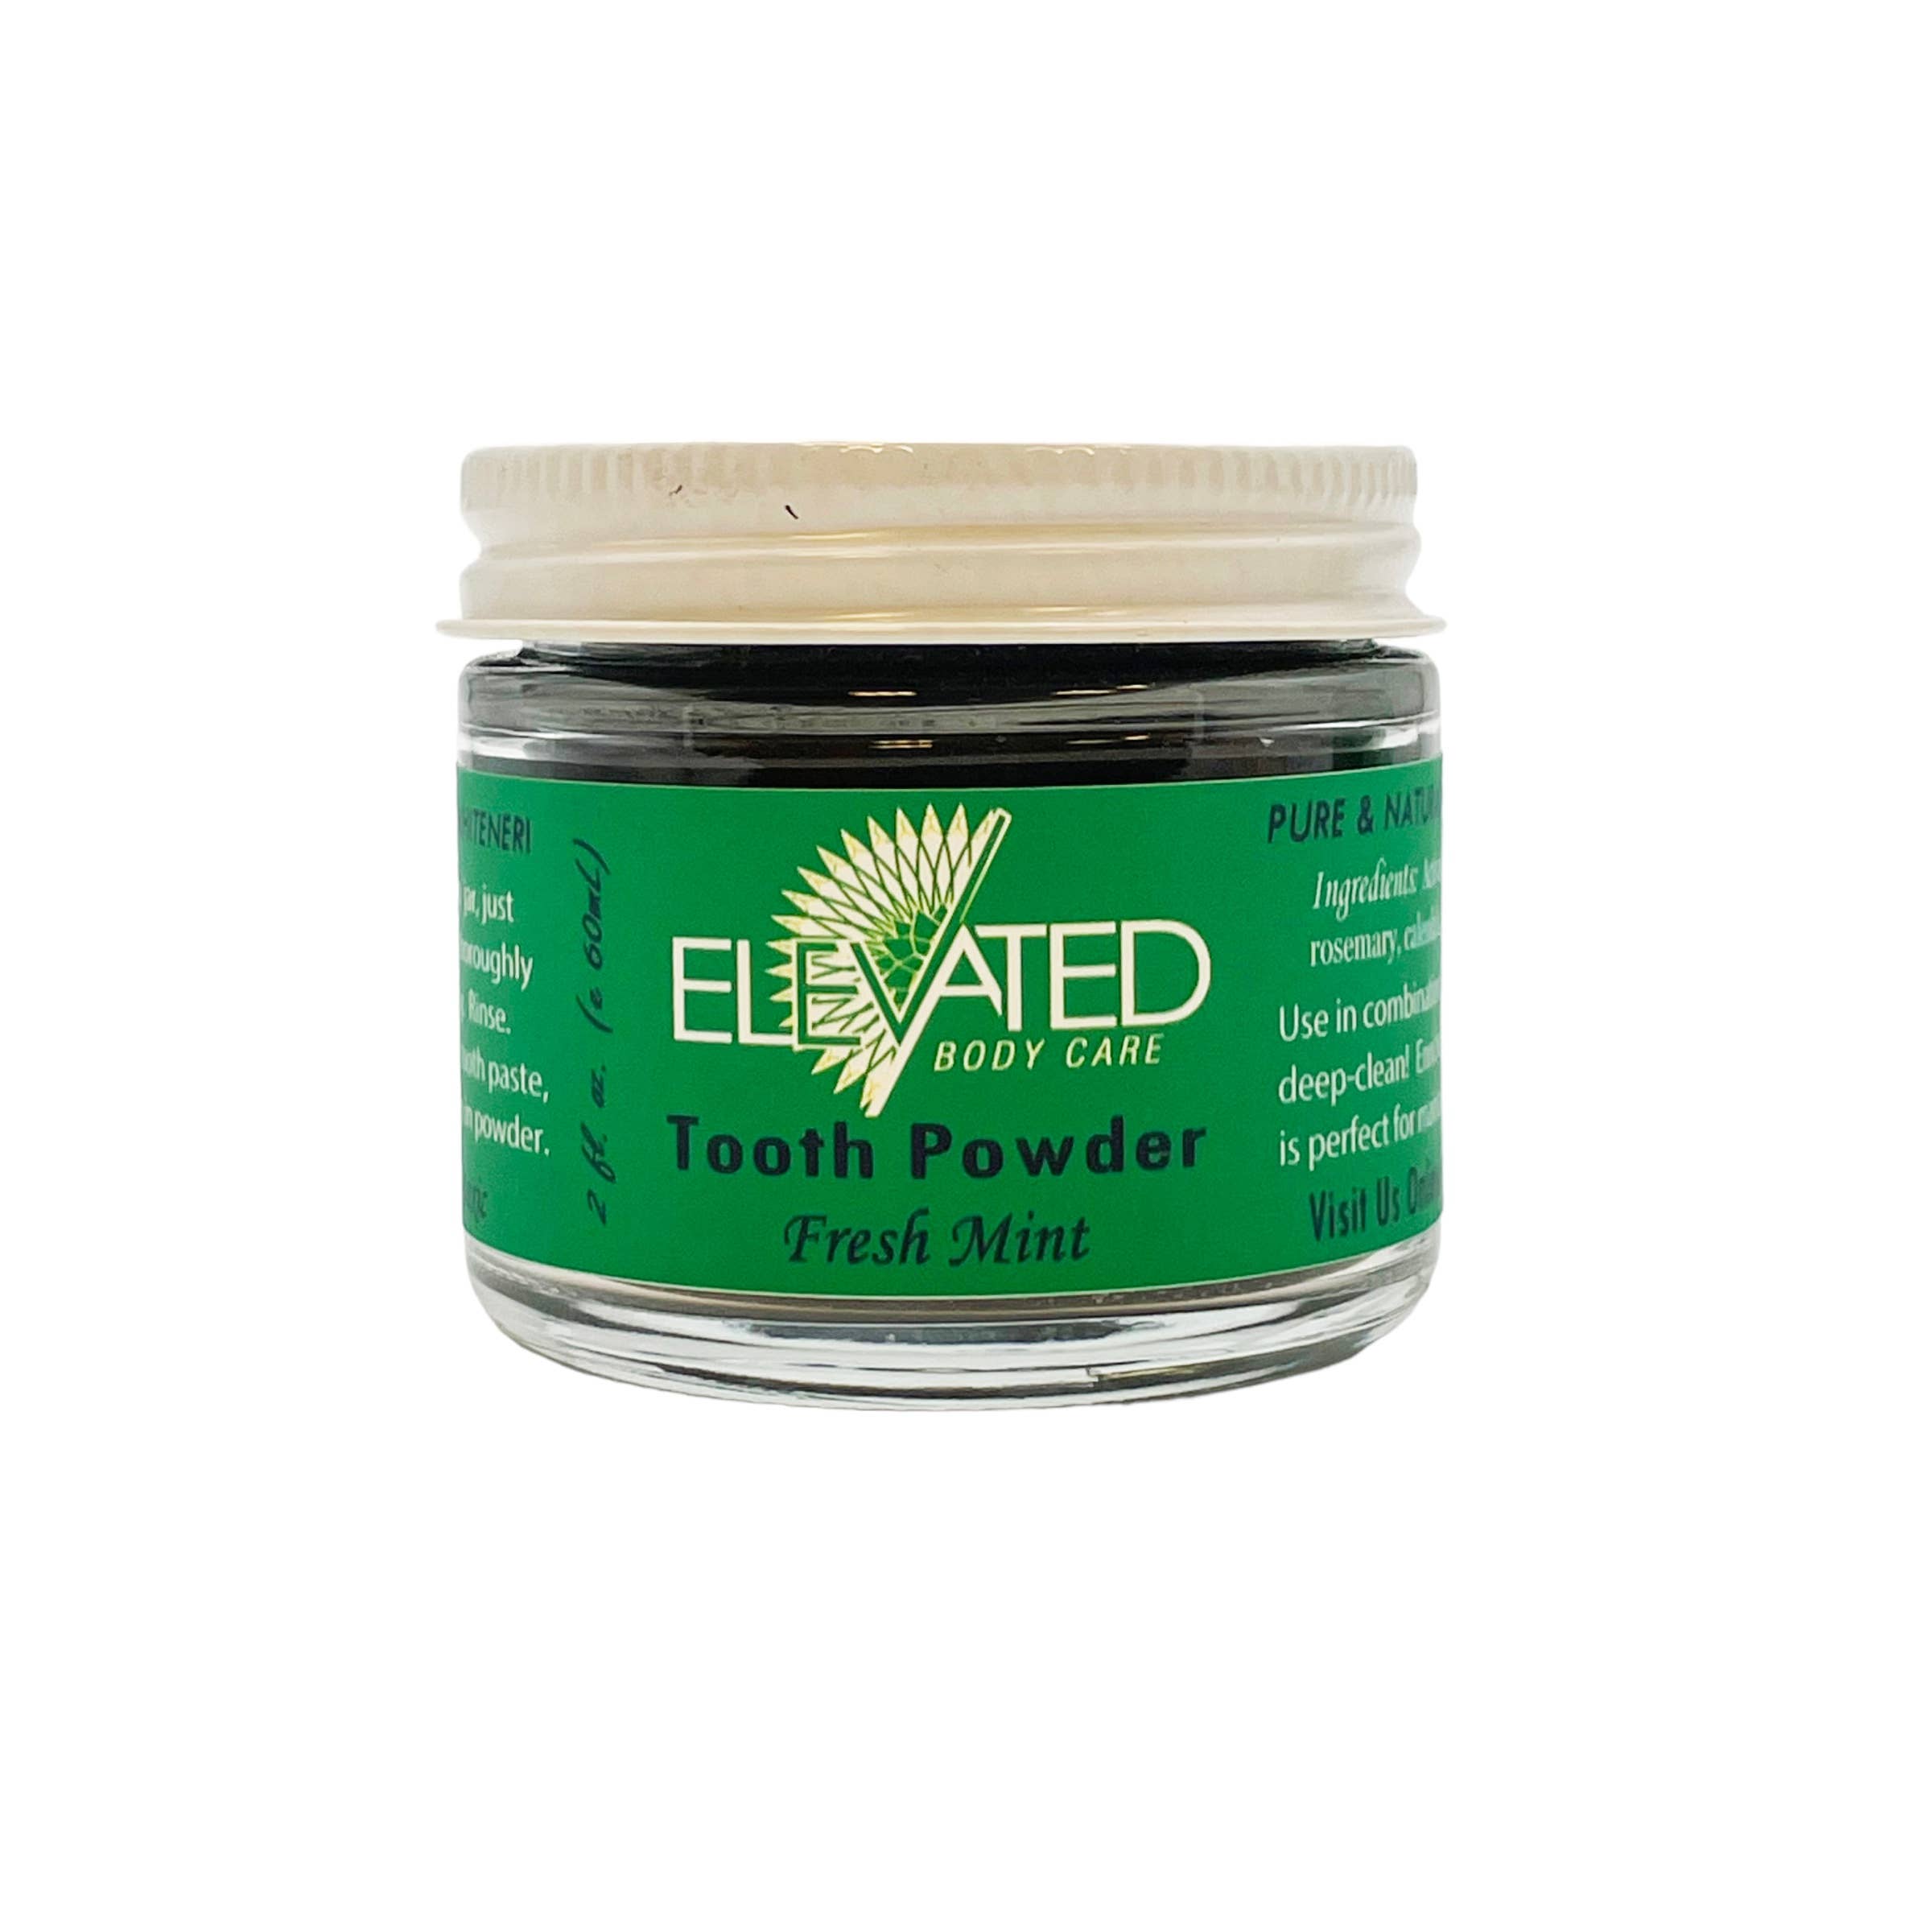 ELEVATED - Charcoal TOOTH Powder - Plastic FREE Glass Jar